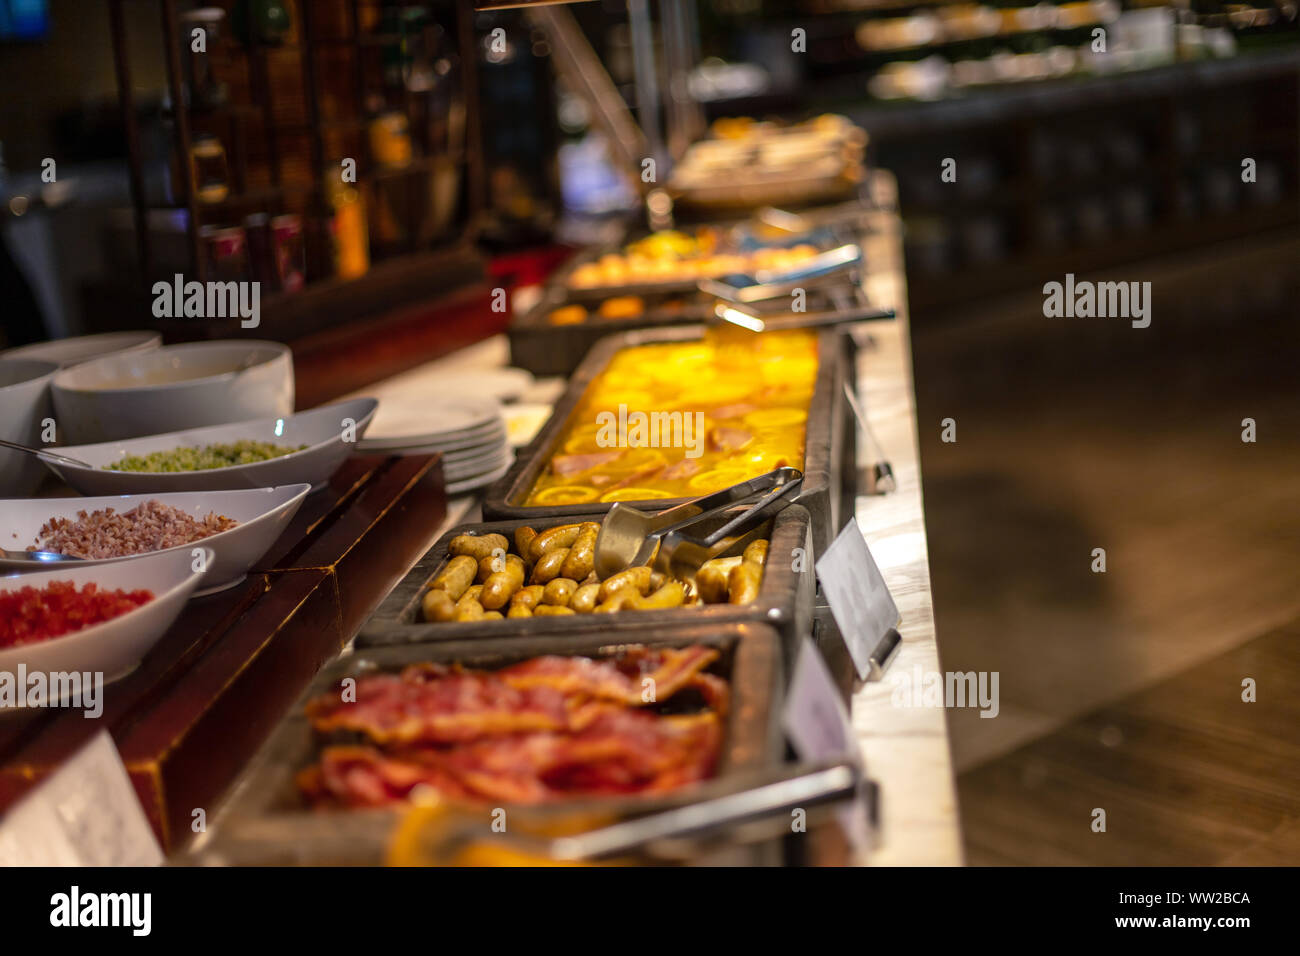 Buffet breakfast at a Chinese hotel. Focus on sausages on blurry background of food trays. Breakfast is included in the hotel. Stock Photo